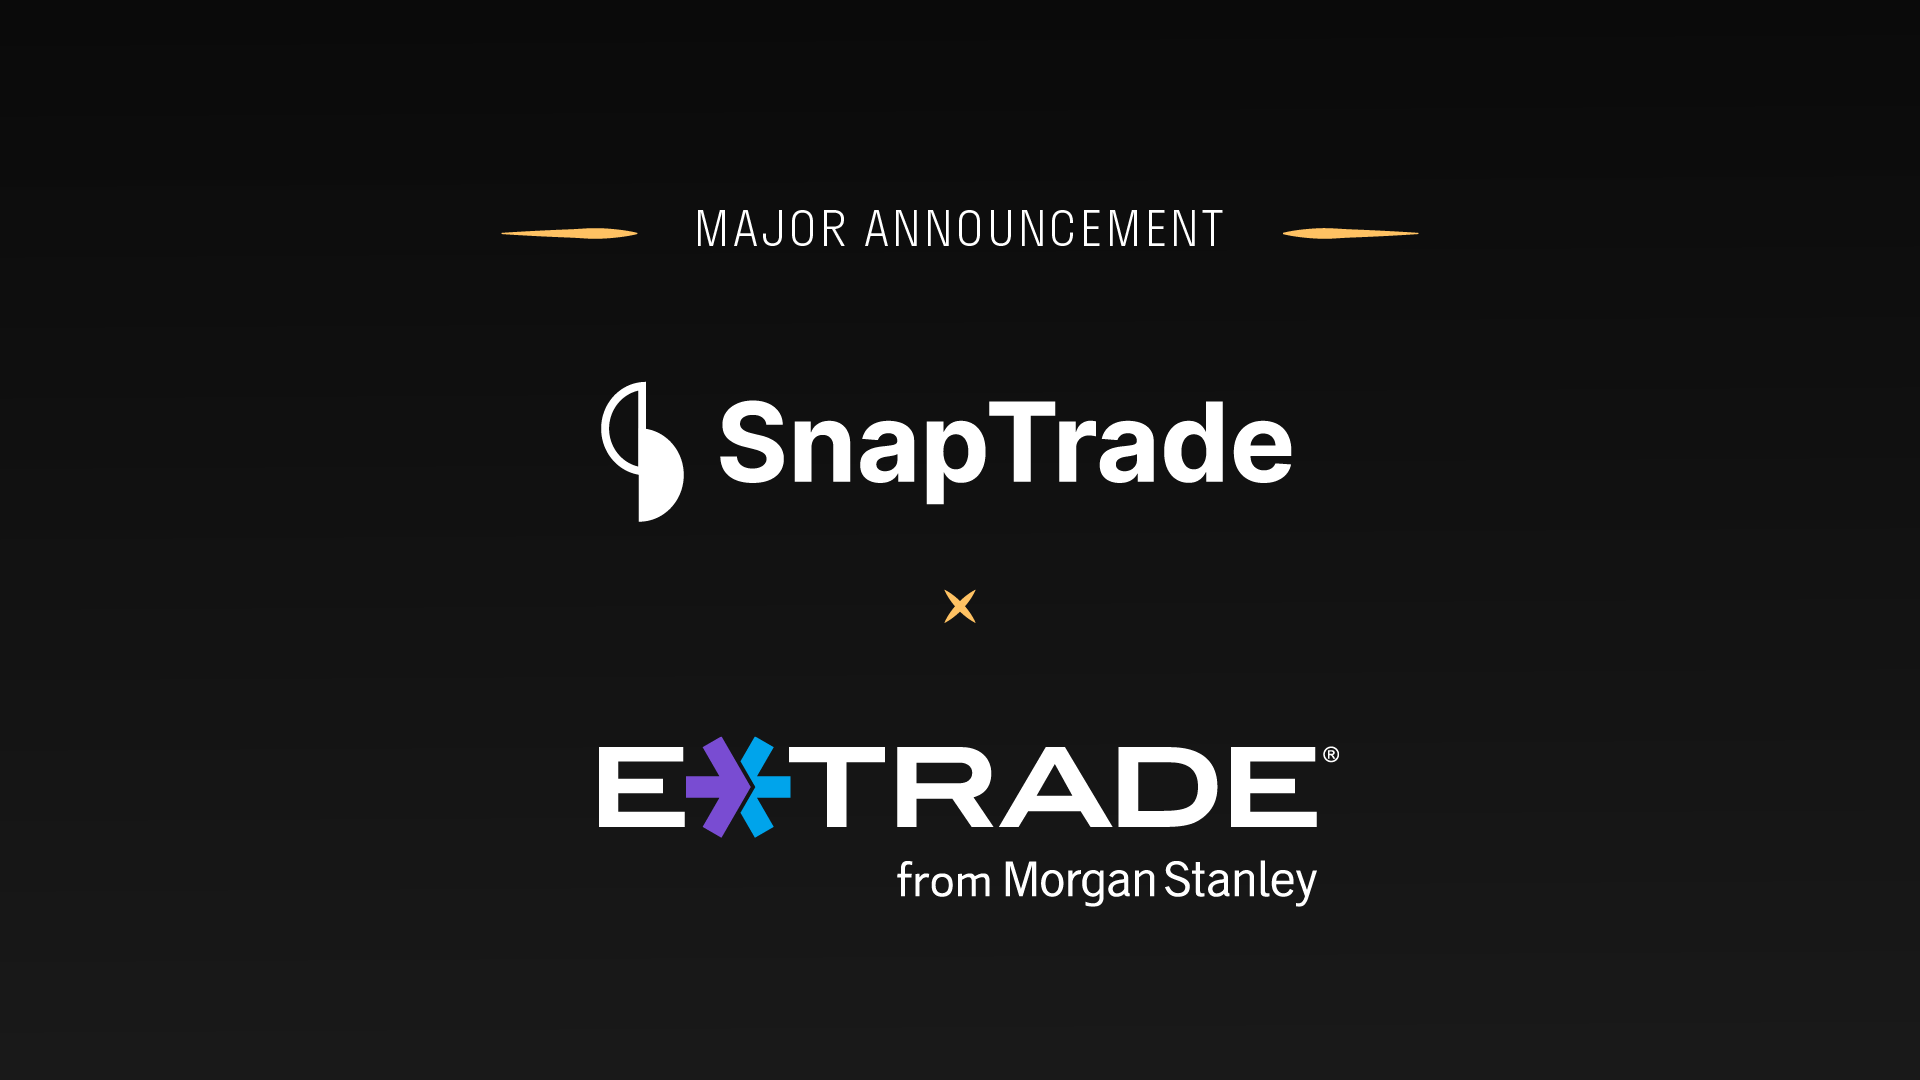 SnapTrade Launches Official Integration With E*TRADE